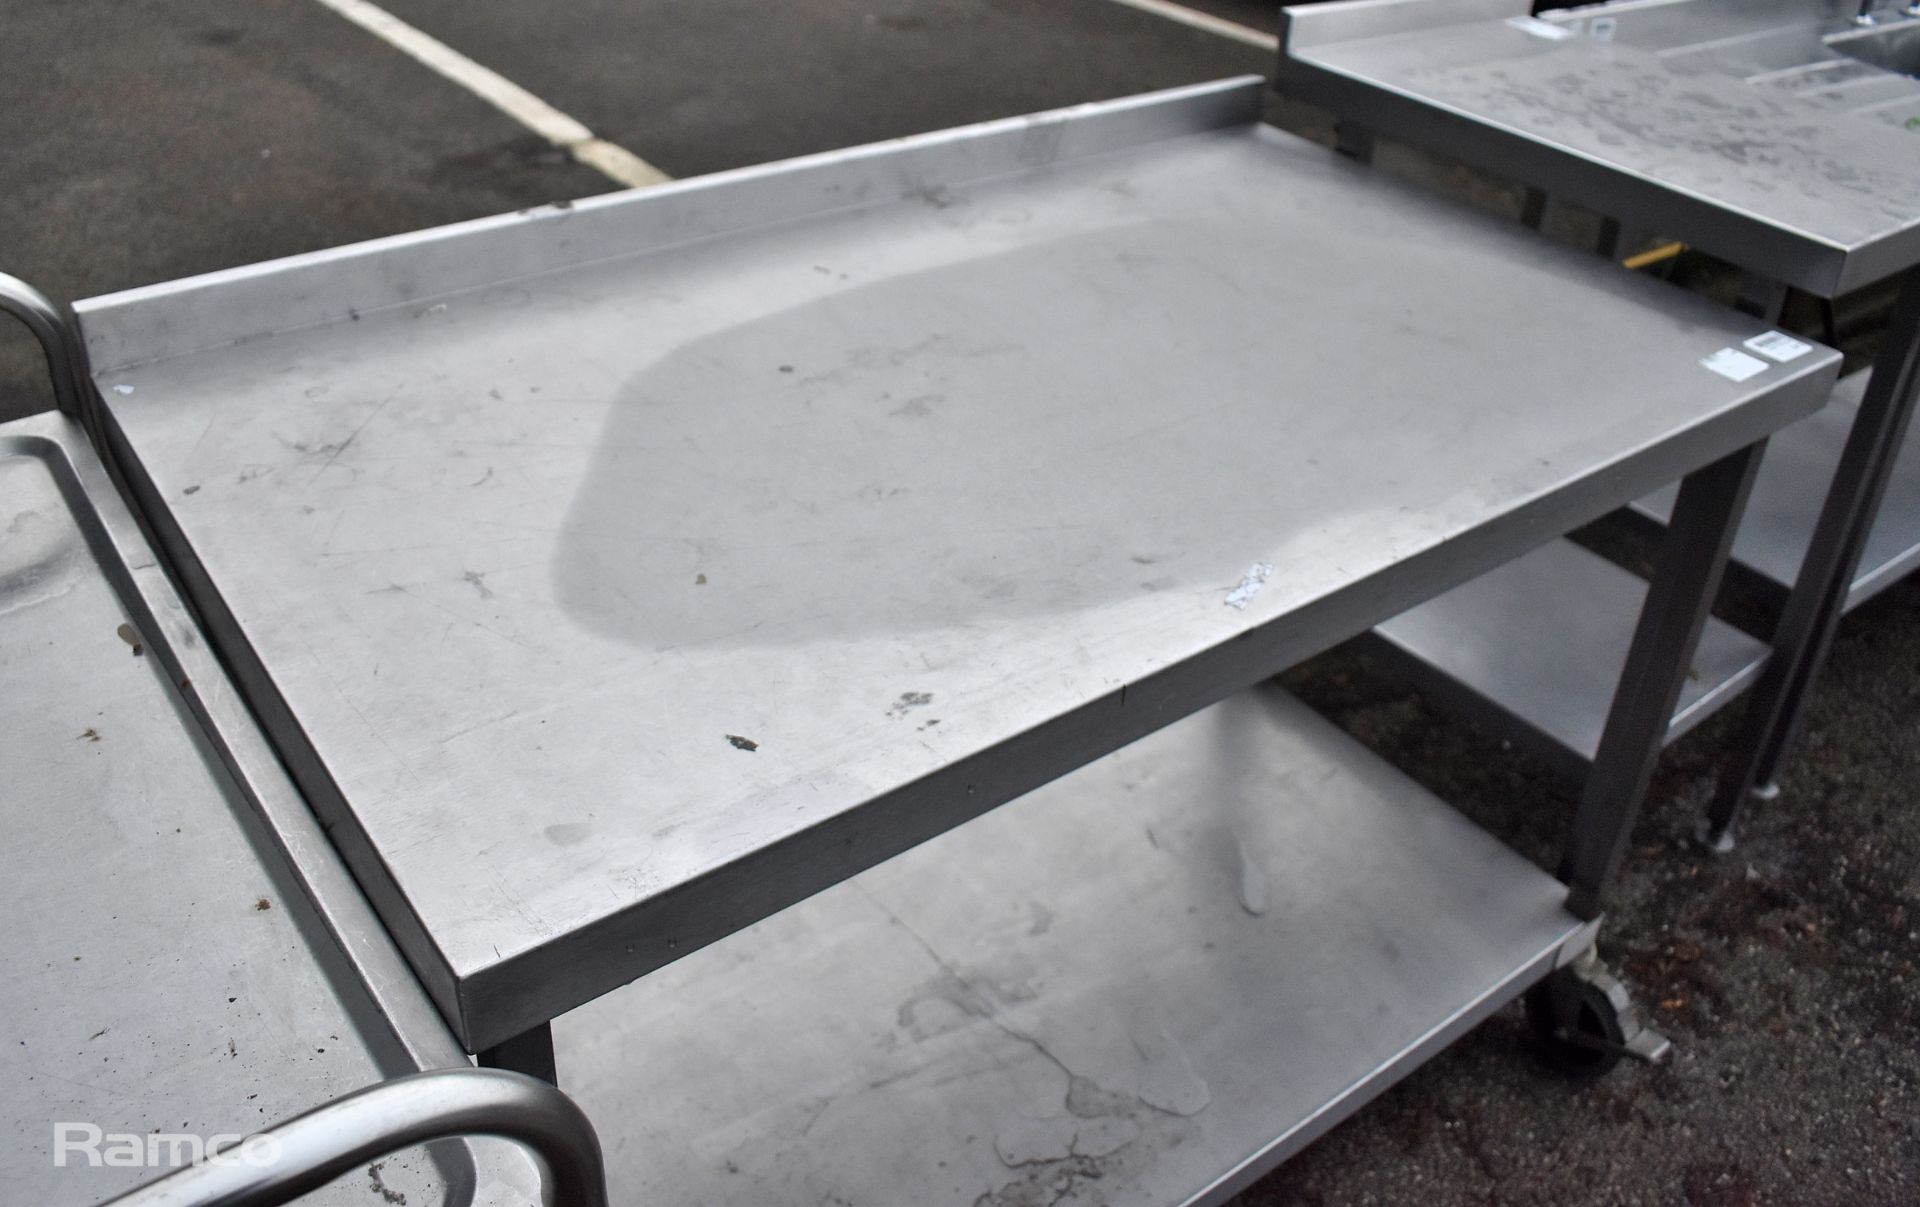 Stainless steel table with shelf on wheels - 70x120x90cm - Image 2 of 3